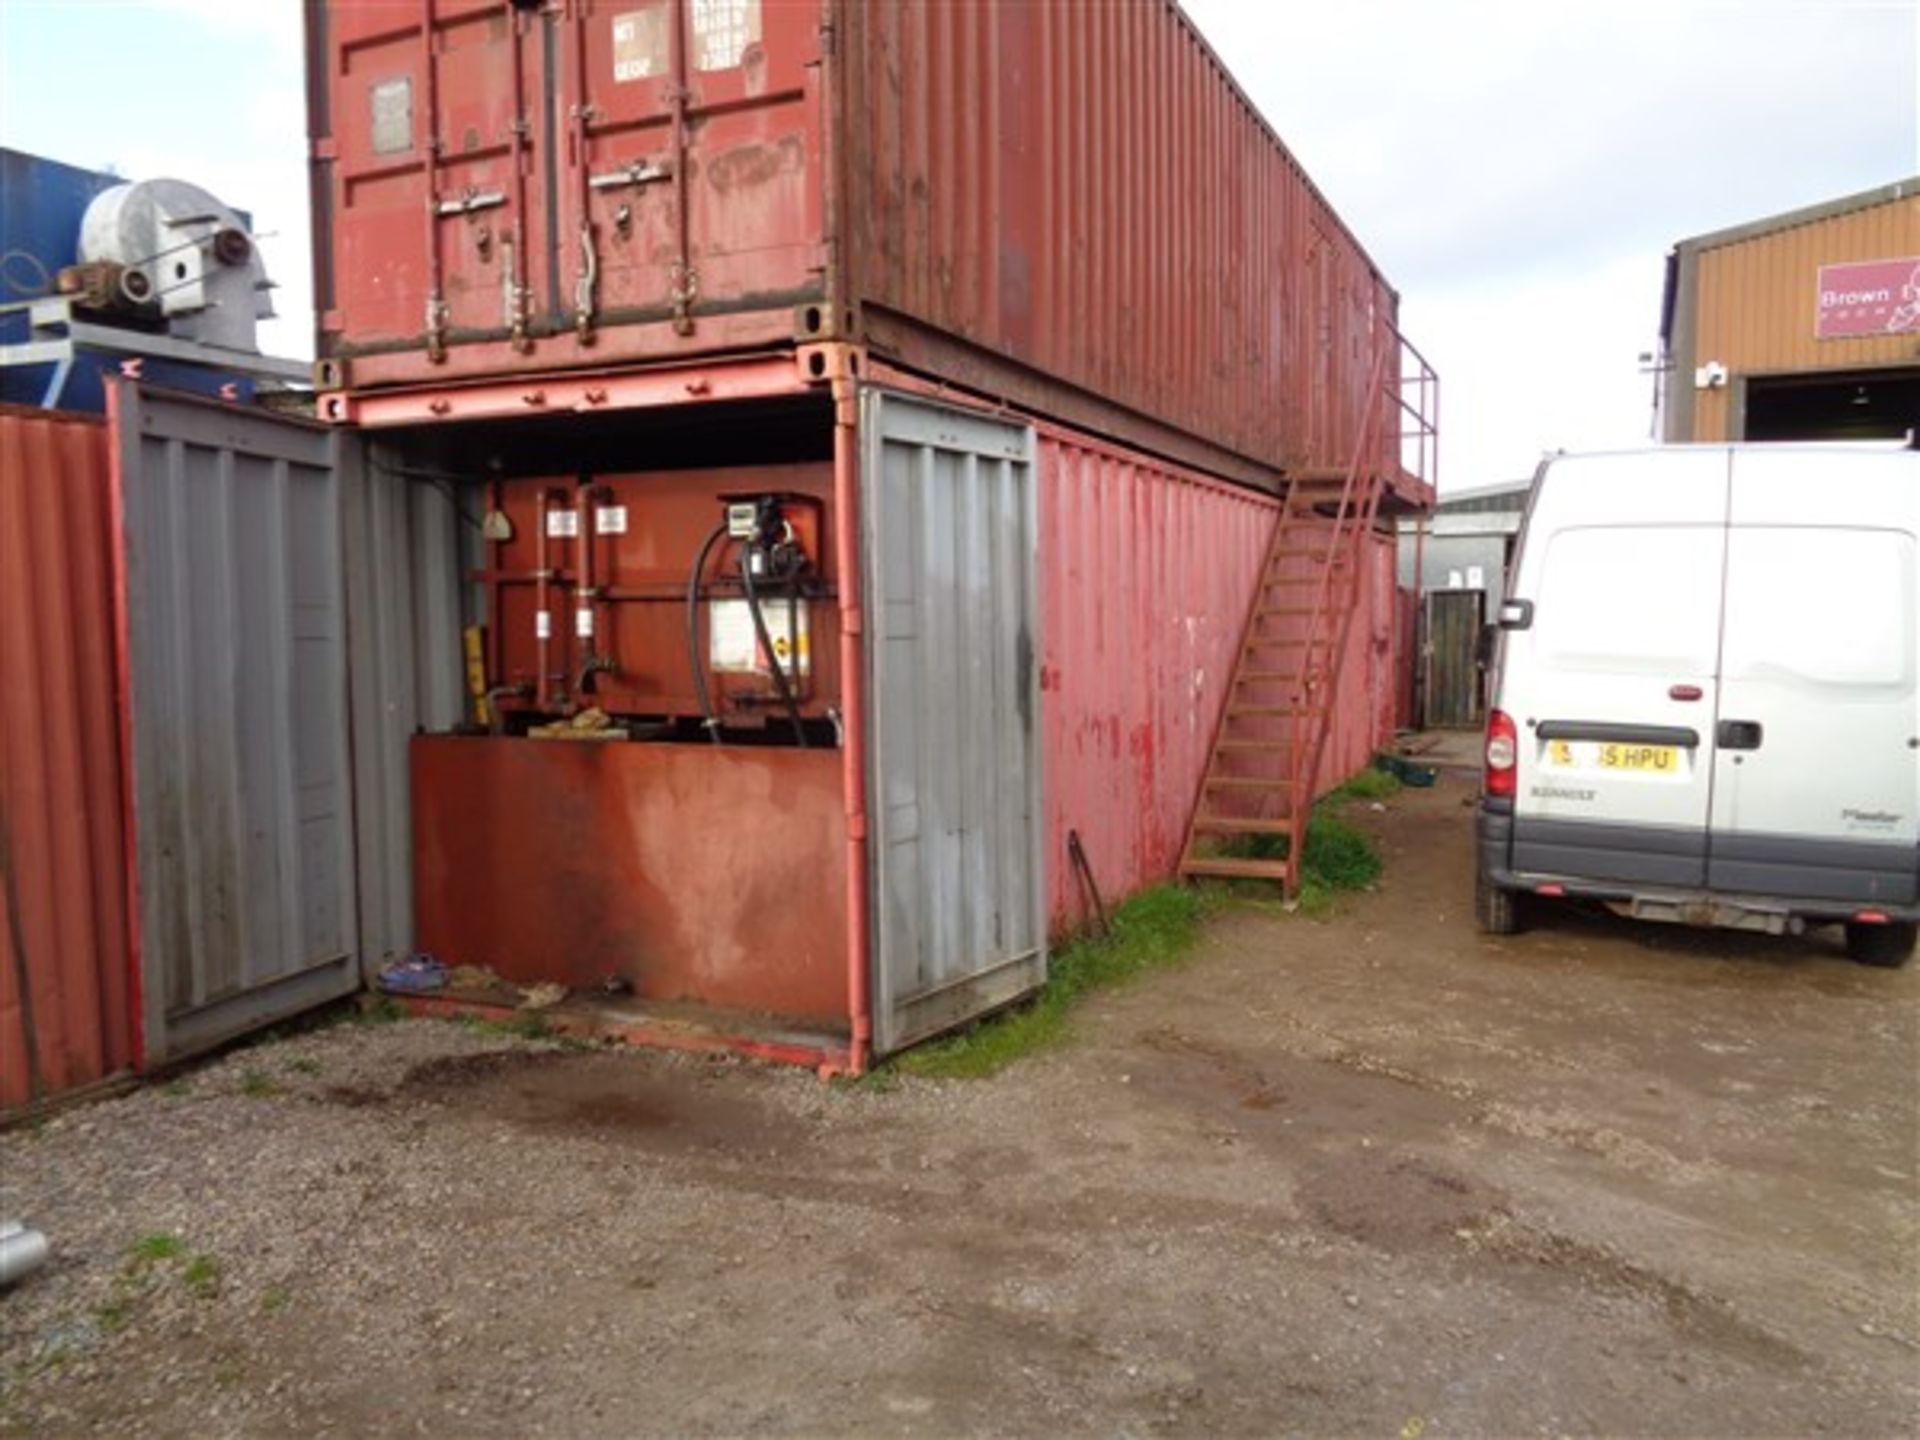 40' steel shipping container complete with bunded twin fuel tank containing approx. 2000 litres of